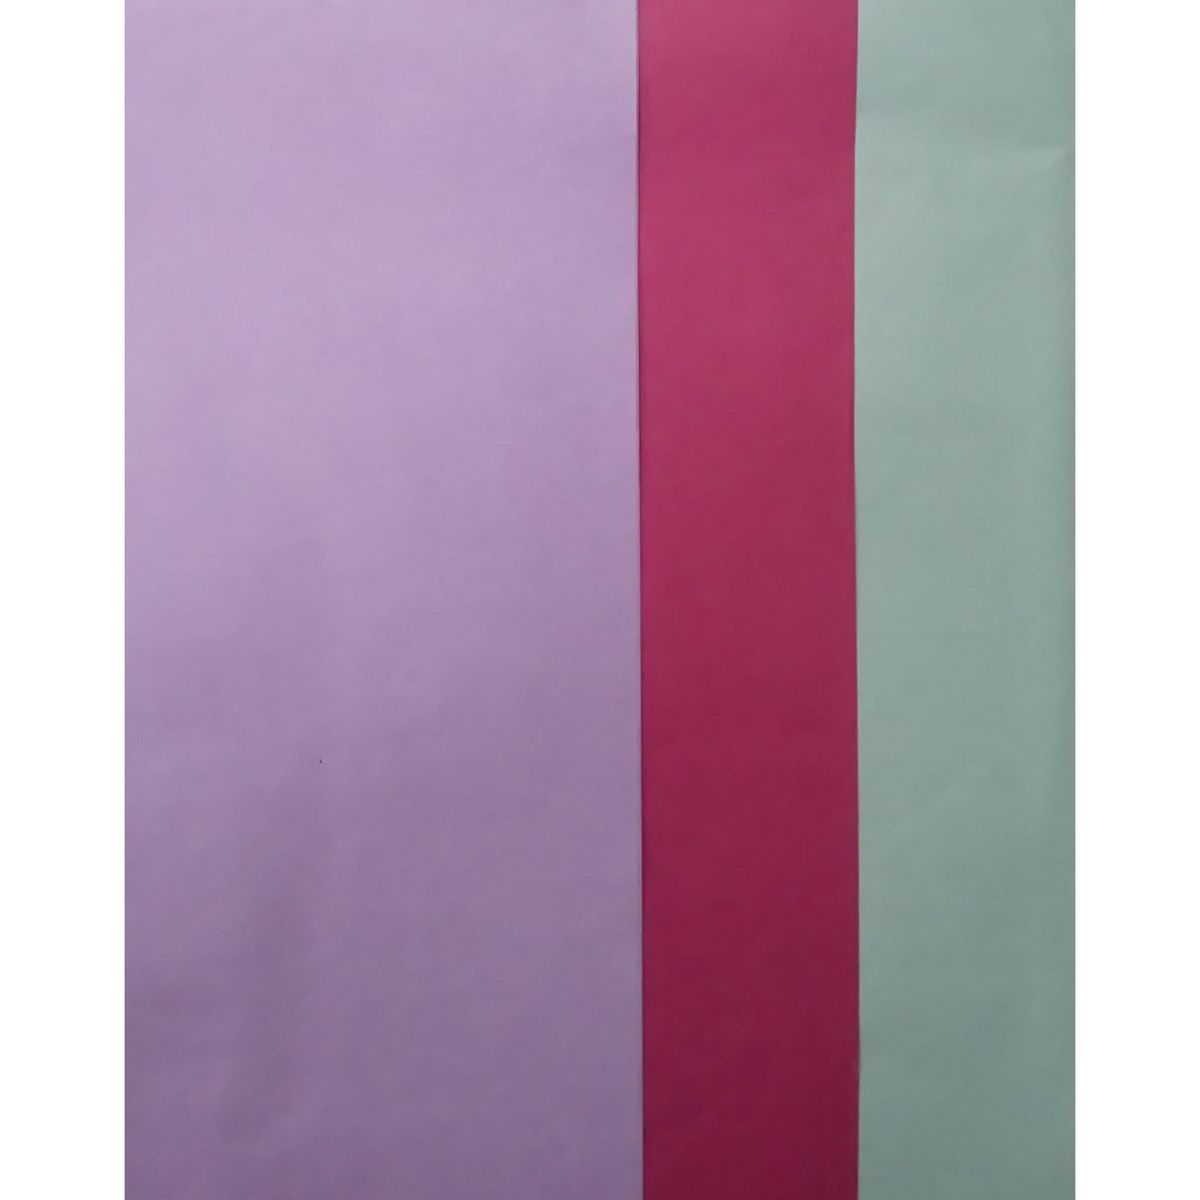 3 Step Banded Tissue Paper Purple/Pink/Turquoise - Spritz™ | Target